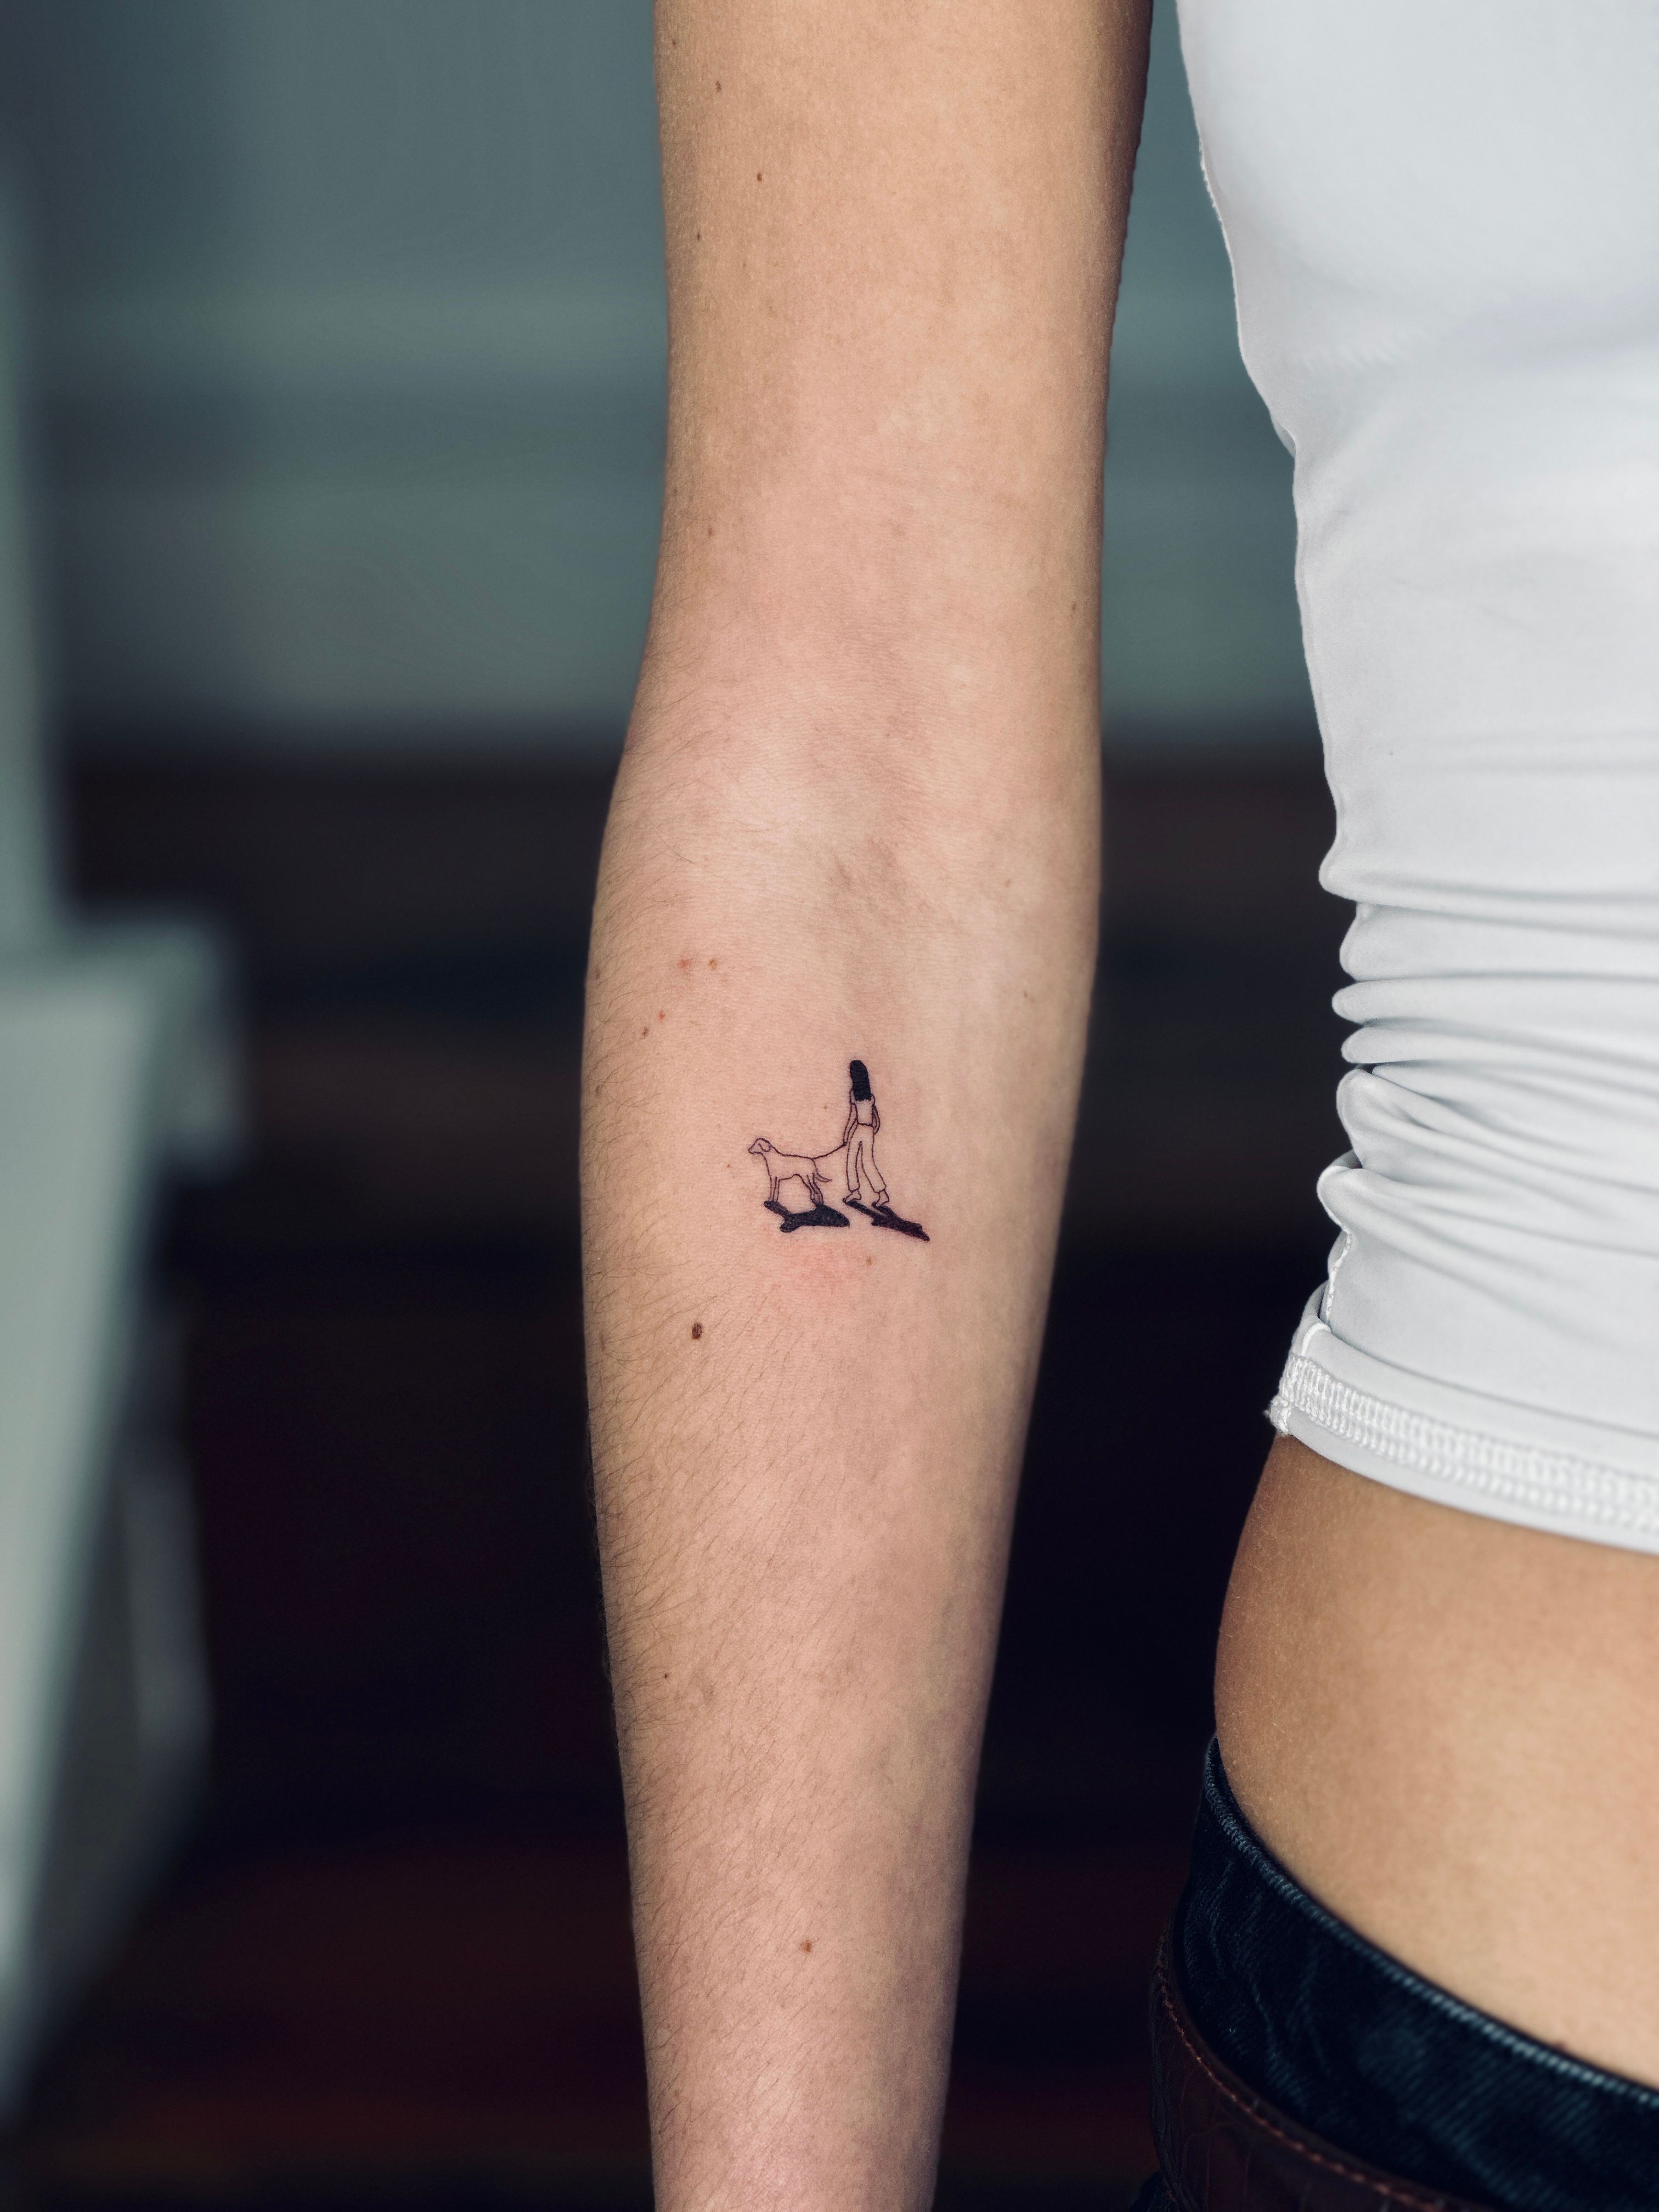 14 Astrology Tattoos to Inspire Your Own Design | POPSUGAR Beauty